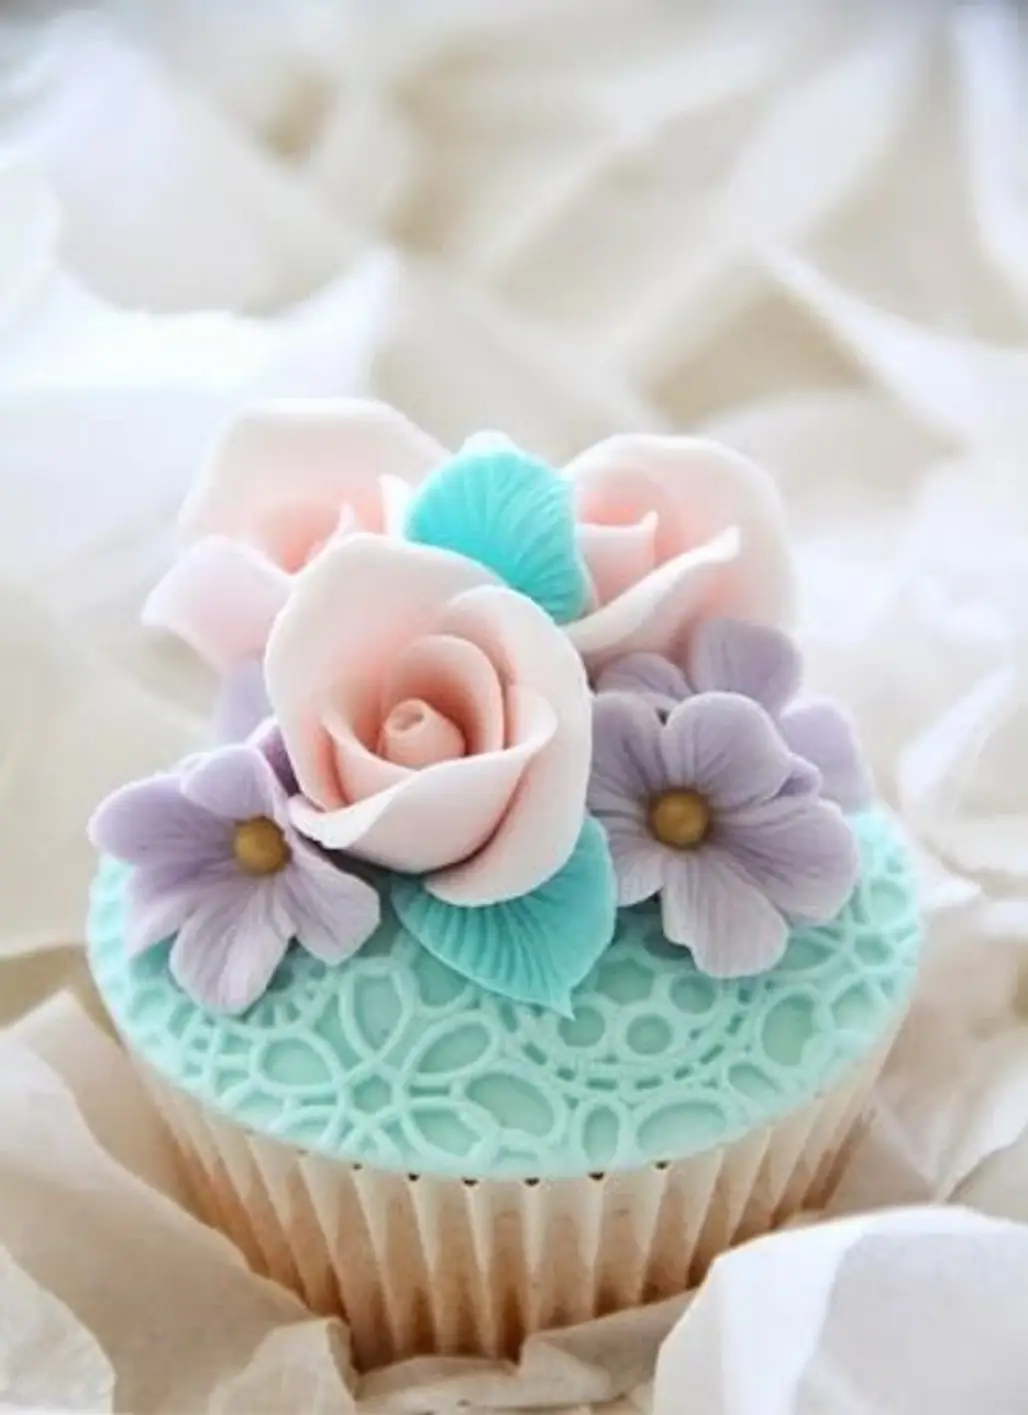 Bake Cupcakes and Decorate with Pastel-Colored Frosting